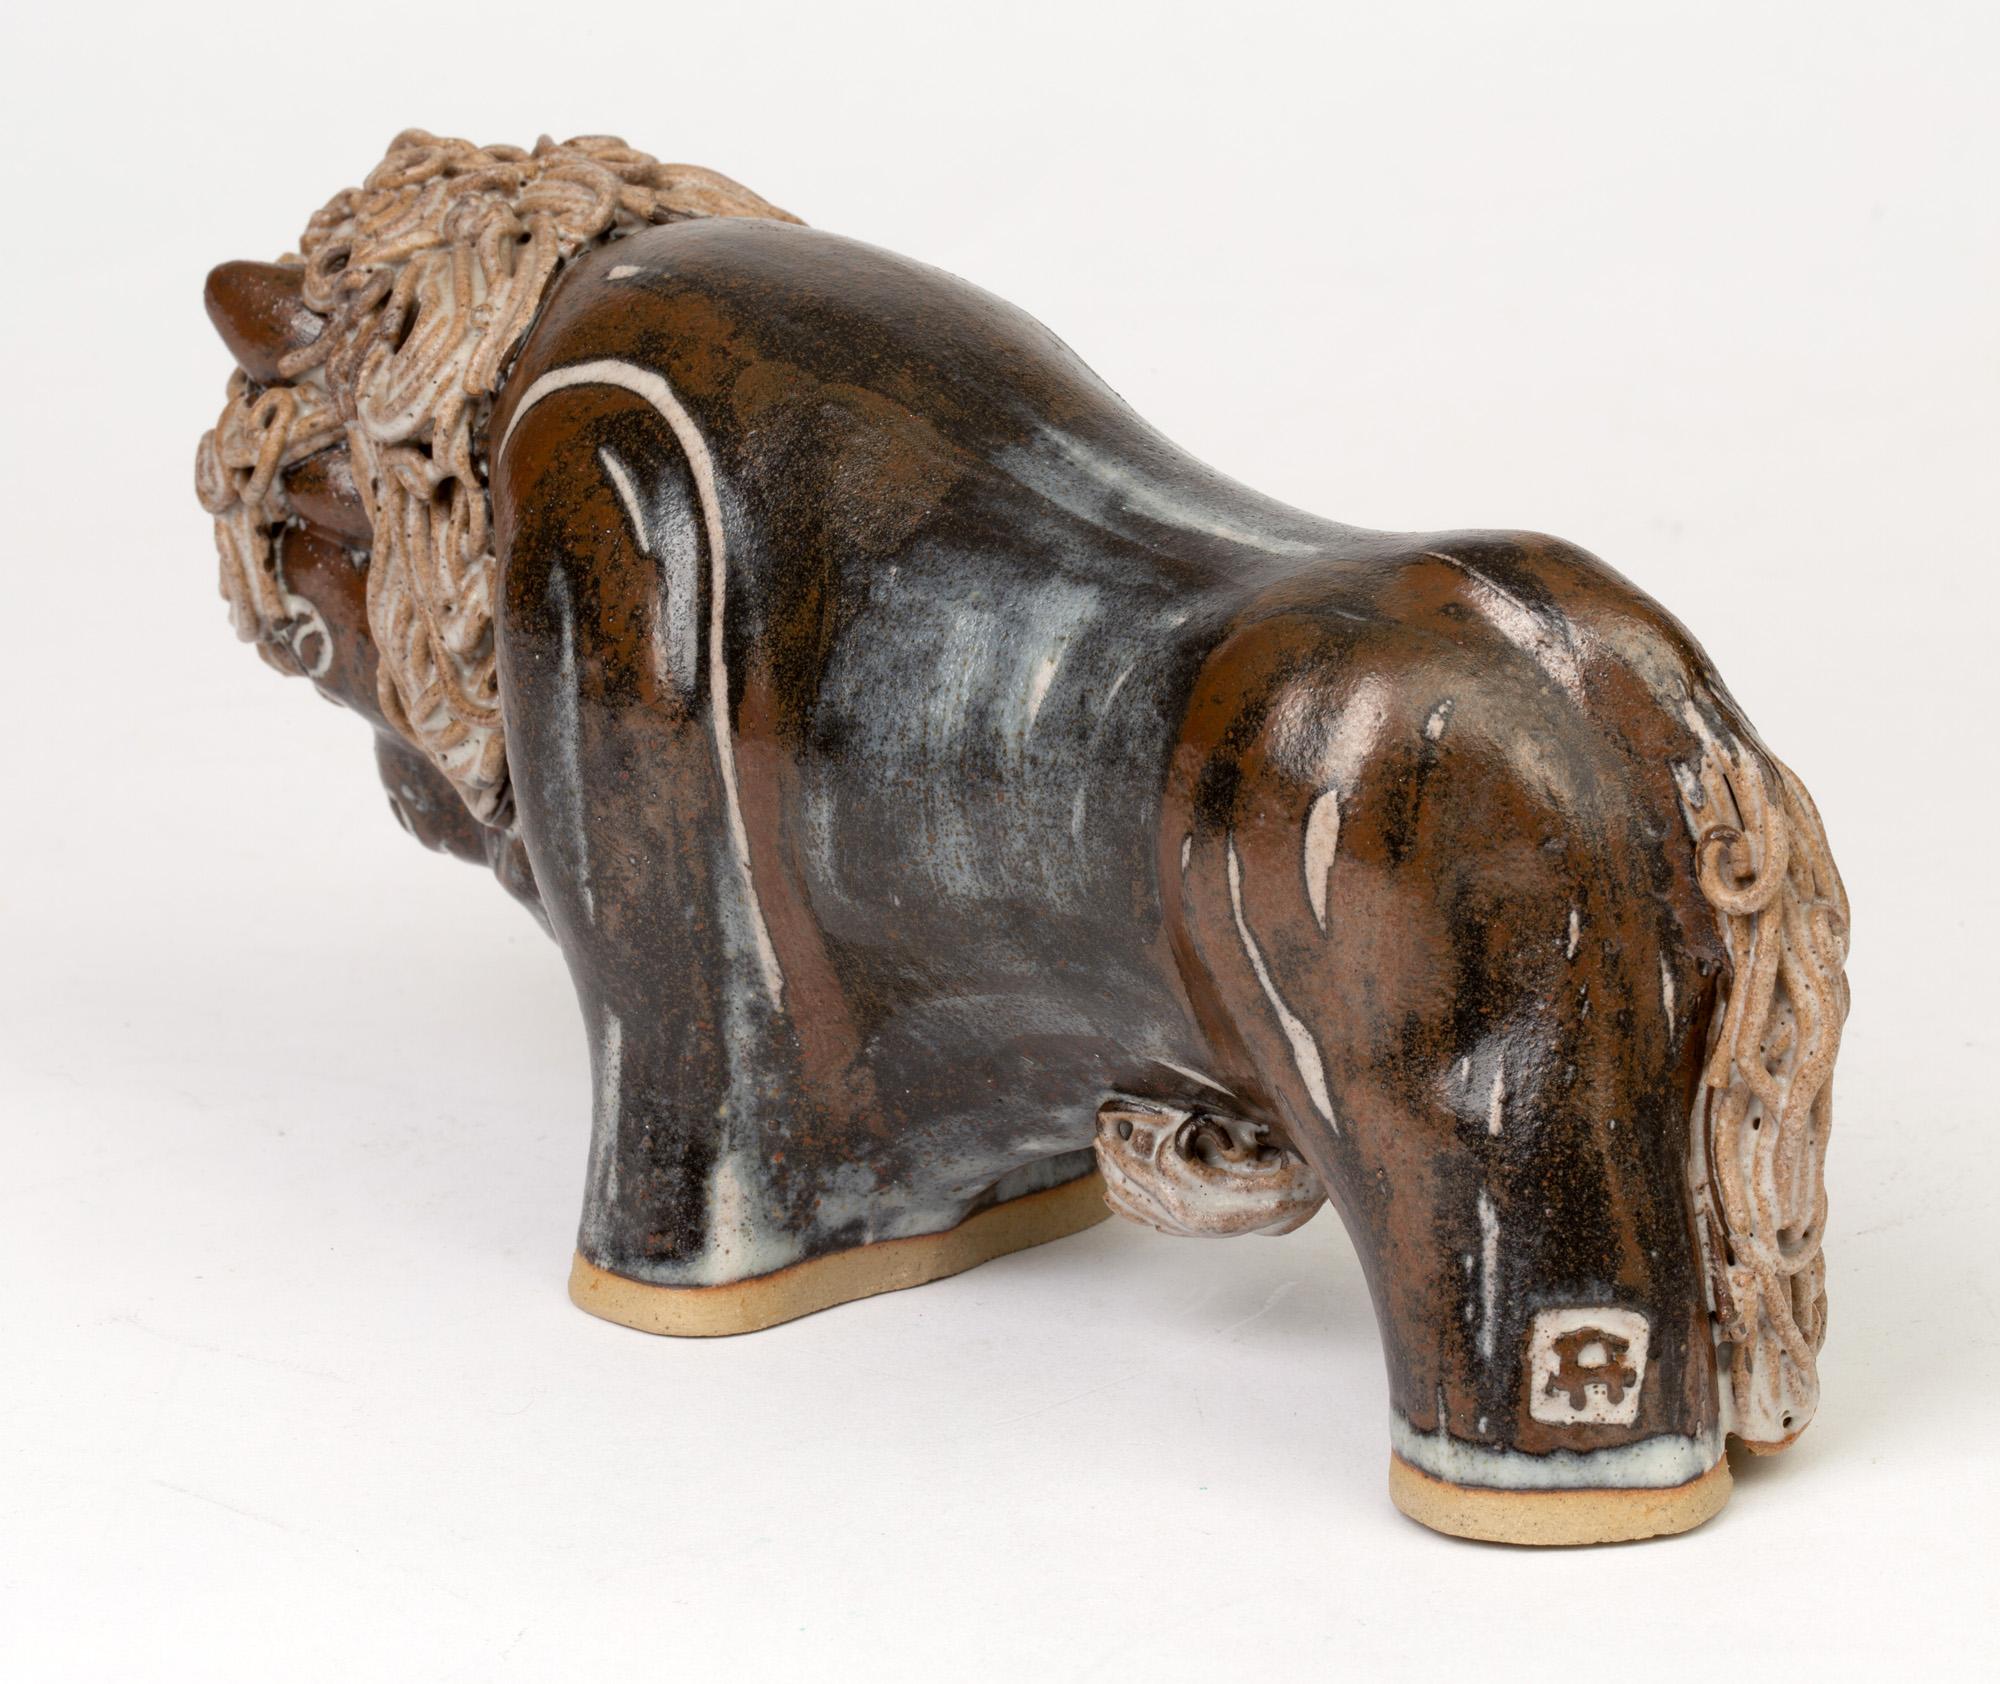 A stylish sculptural Studio Pottery of a bison made by Ann & John Farquharson and dating to the later 20th or early 21st century. The standing figure is hand formed with piped clay to its tail, under side and head decorated in a natural salt like